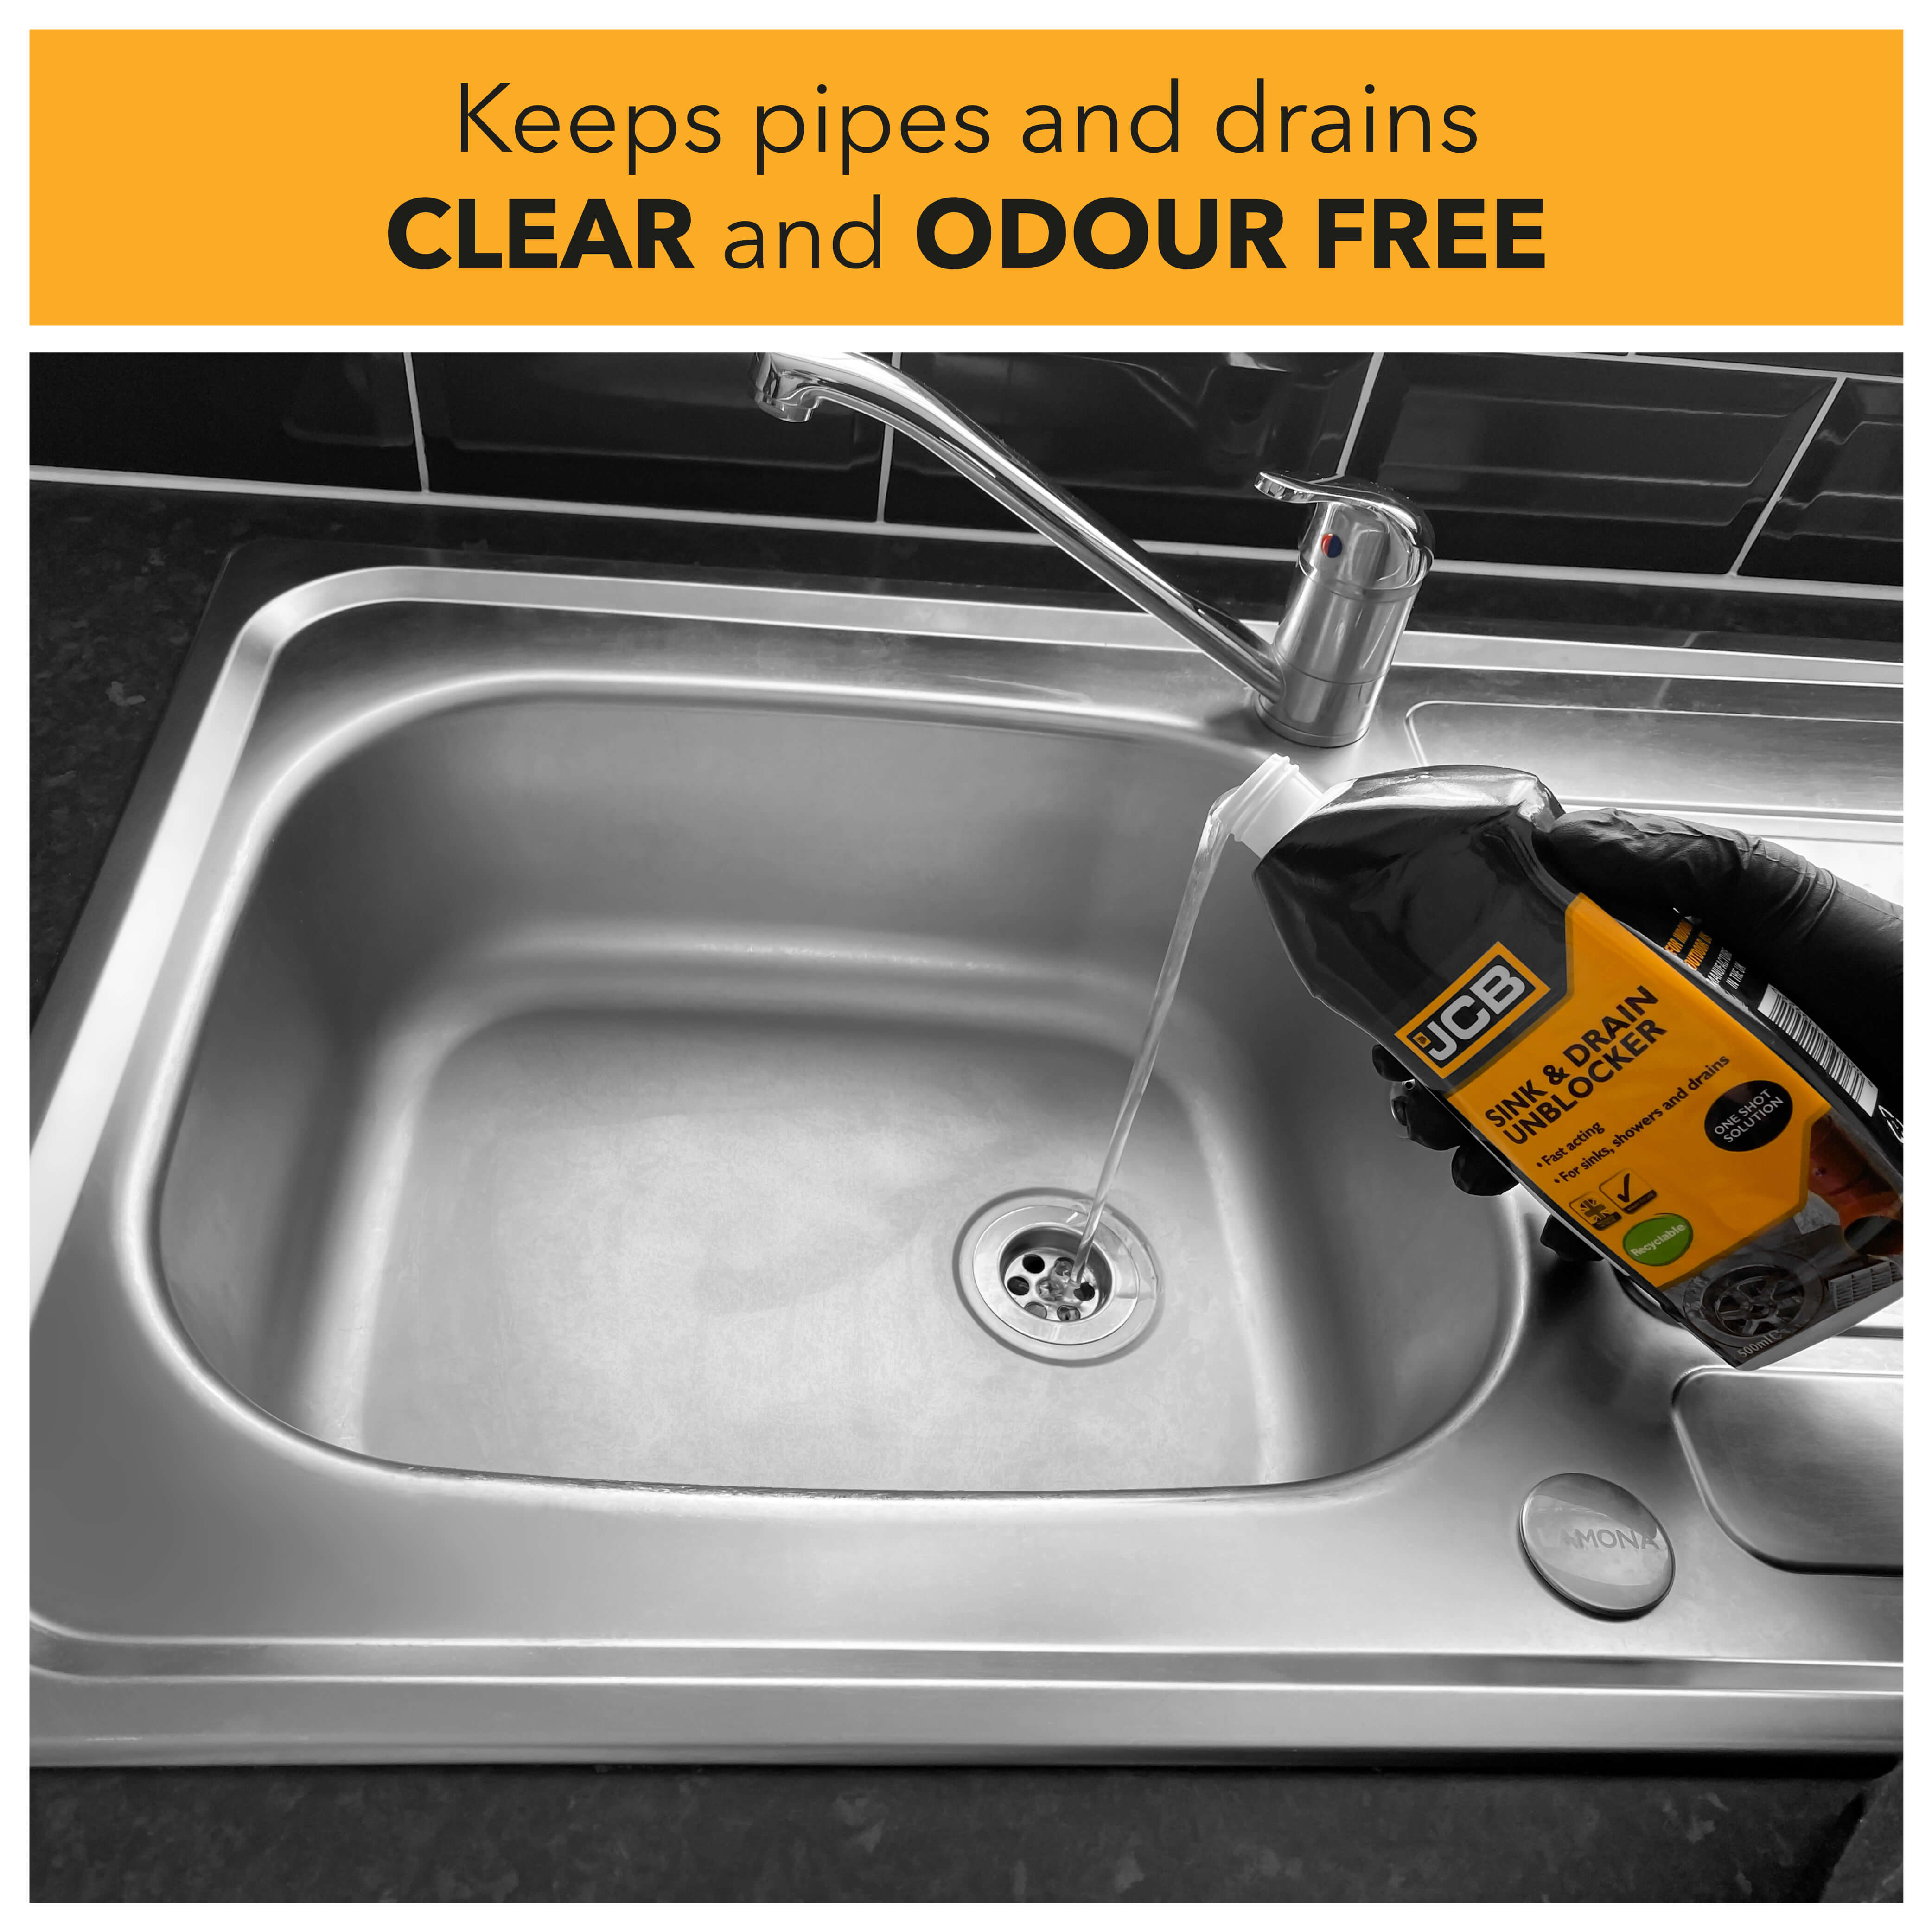 Keeps pipes and drains clear and odour free